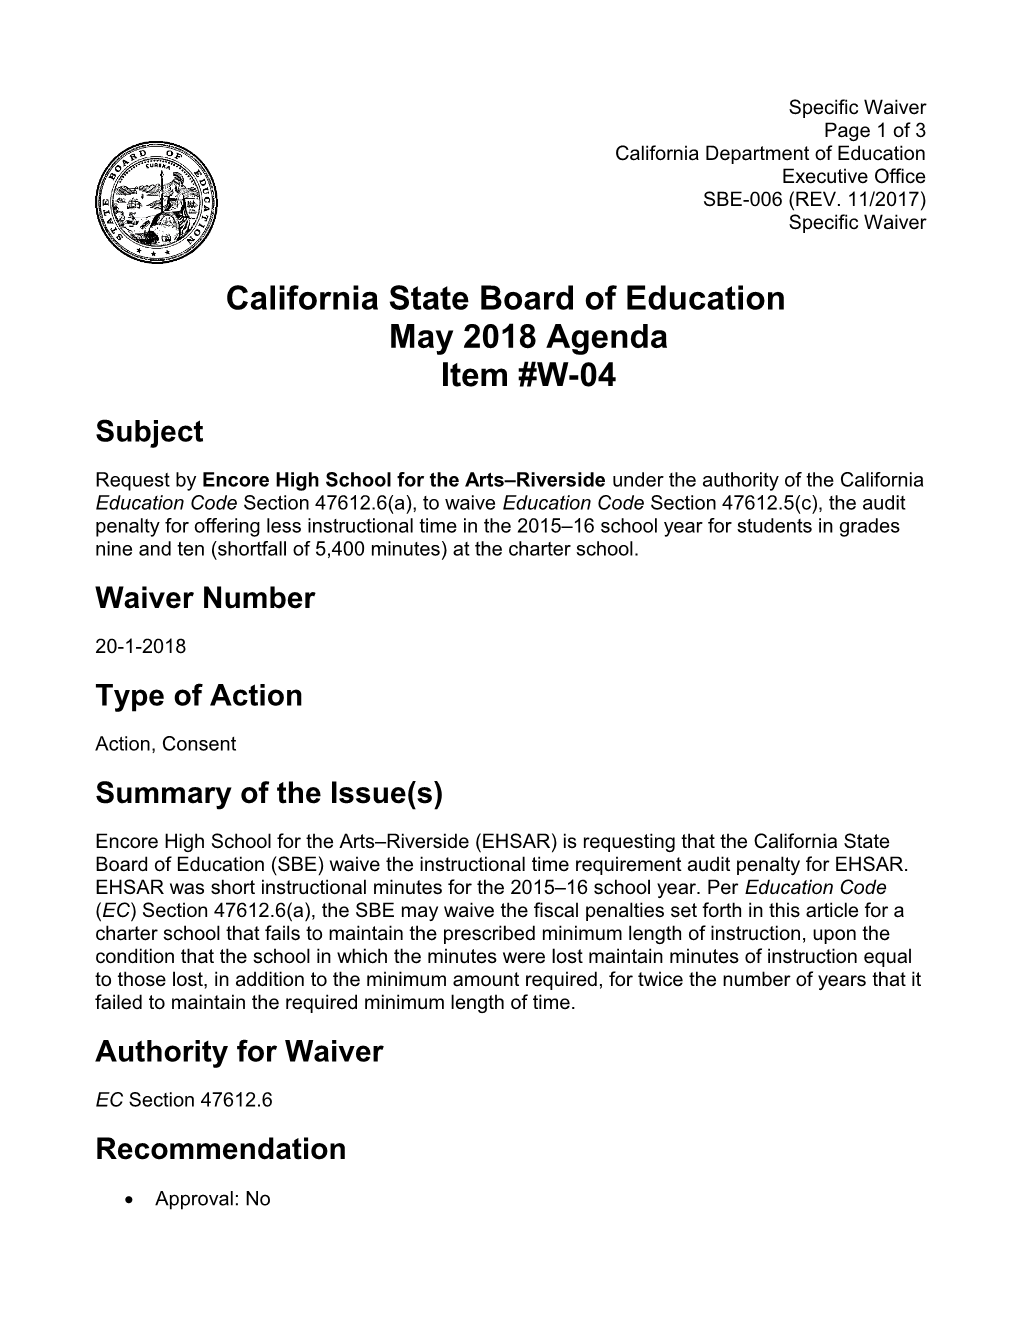 May 2018 Waiver Item W-04 - Meeting Agendas (CA State Board of Education)